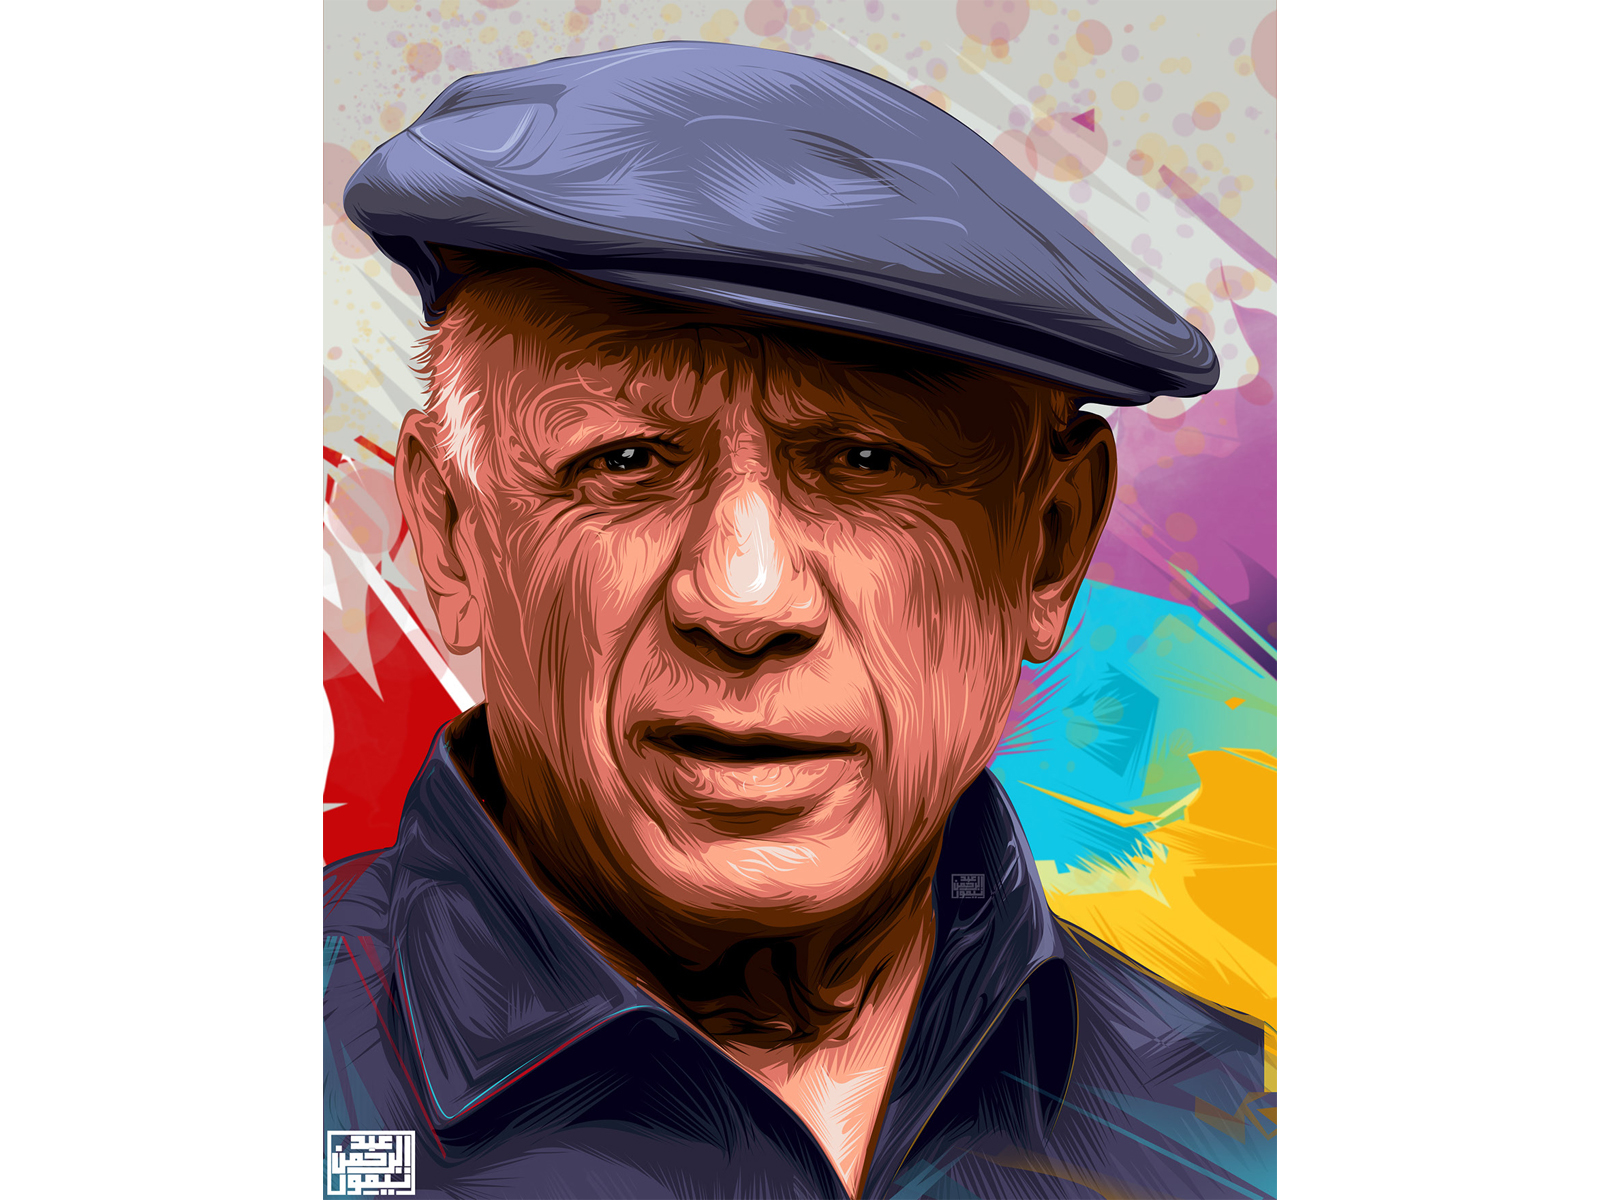 Pablo Picasso Vector art by Abdelrahman Taymour on Dribbble